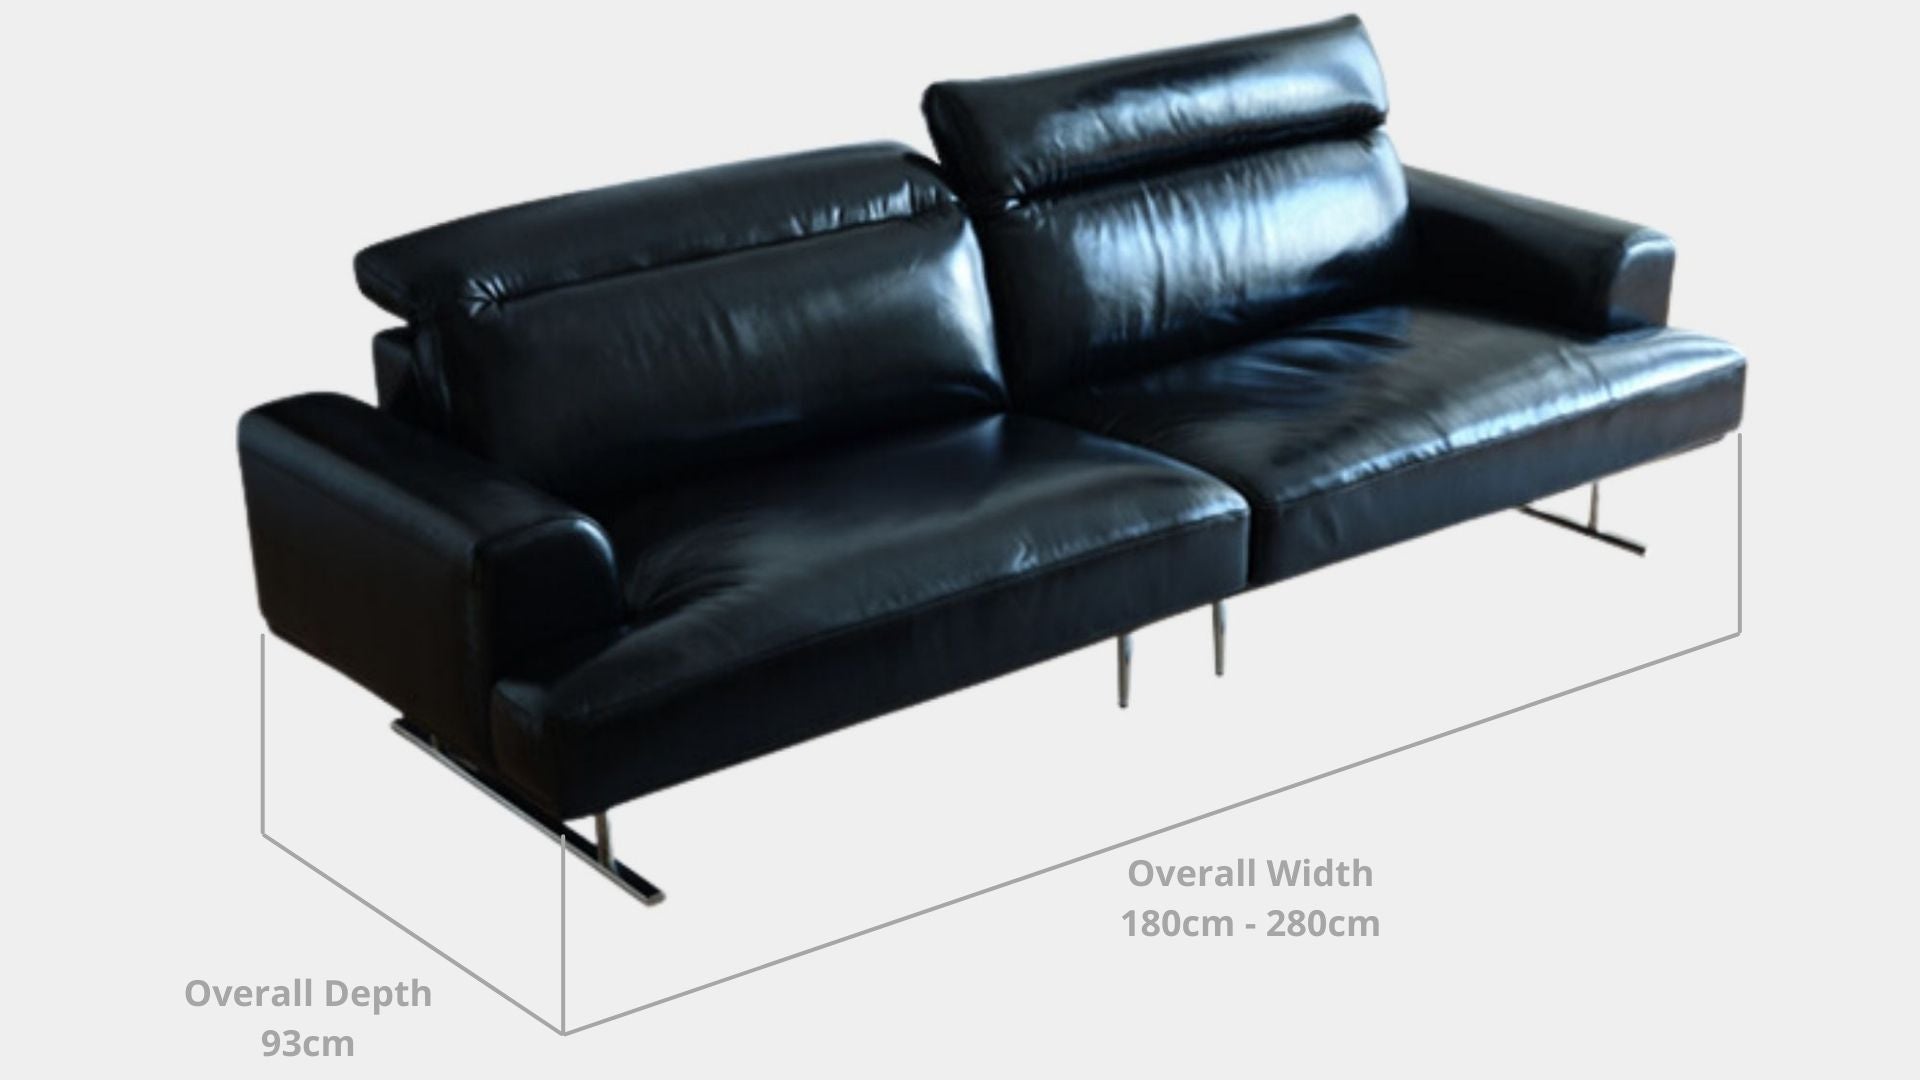 Details the key dimensions in terms of overall width, overall depth and seat width for Charles Half Leather Sofa